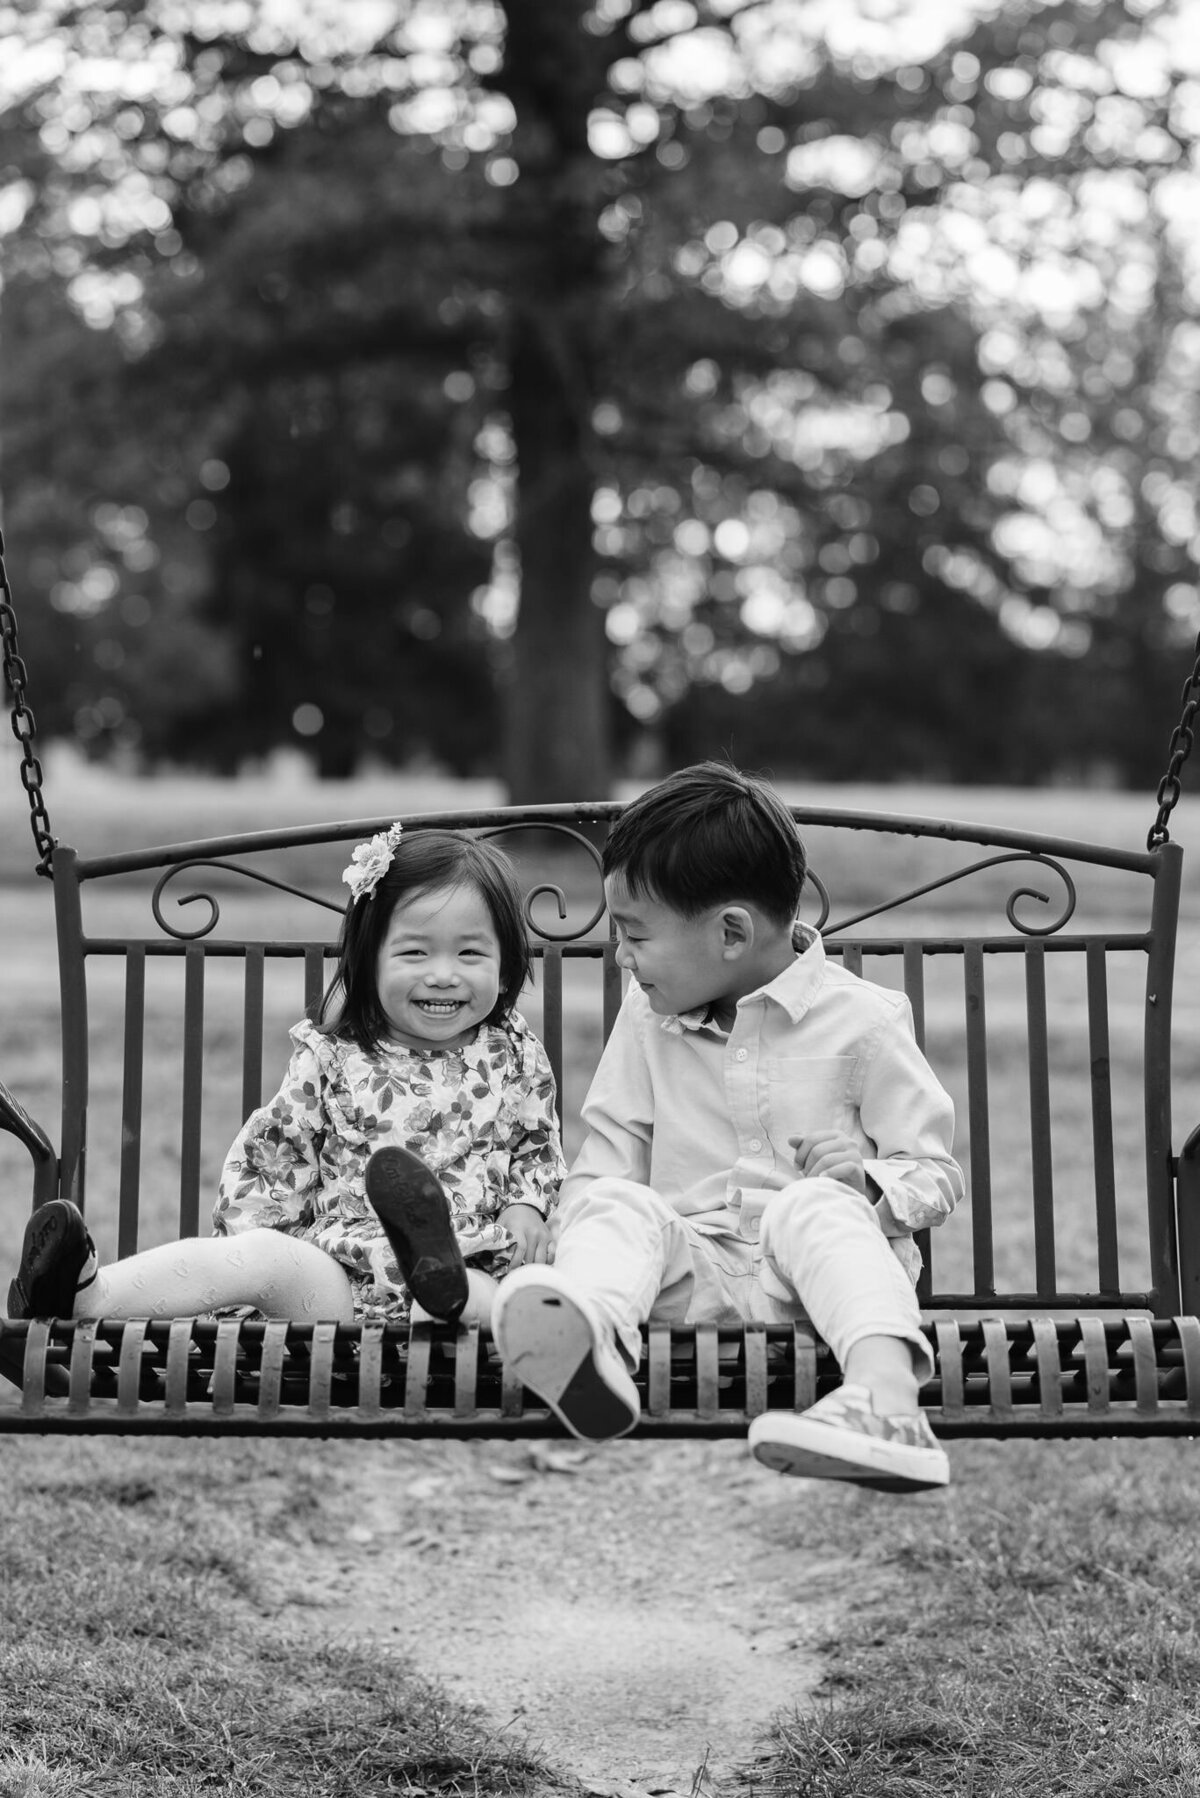 B&w candid moment of a brother looking lovingly at his giggling sister, captured by Denise Van